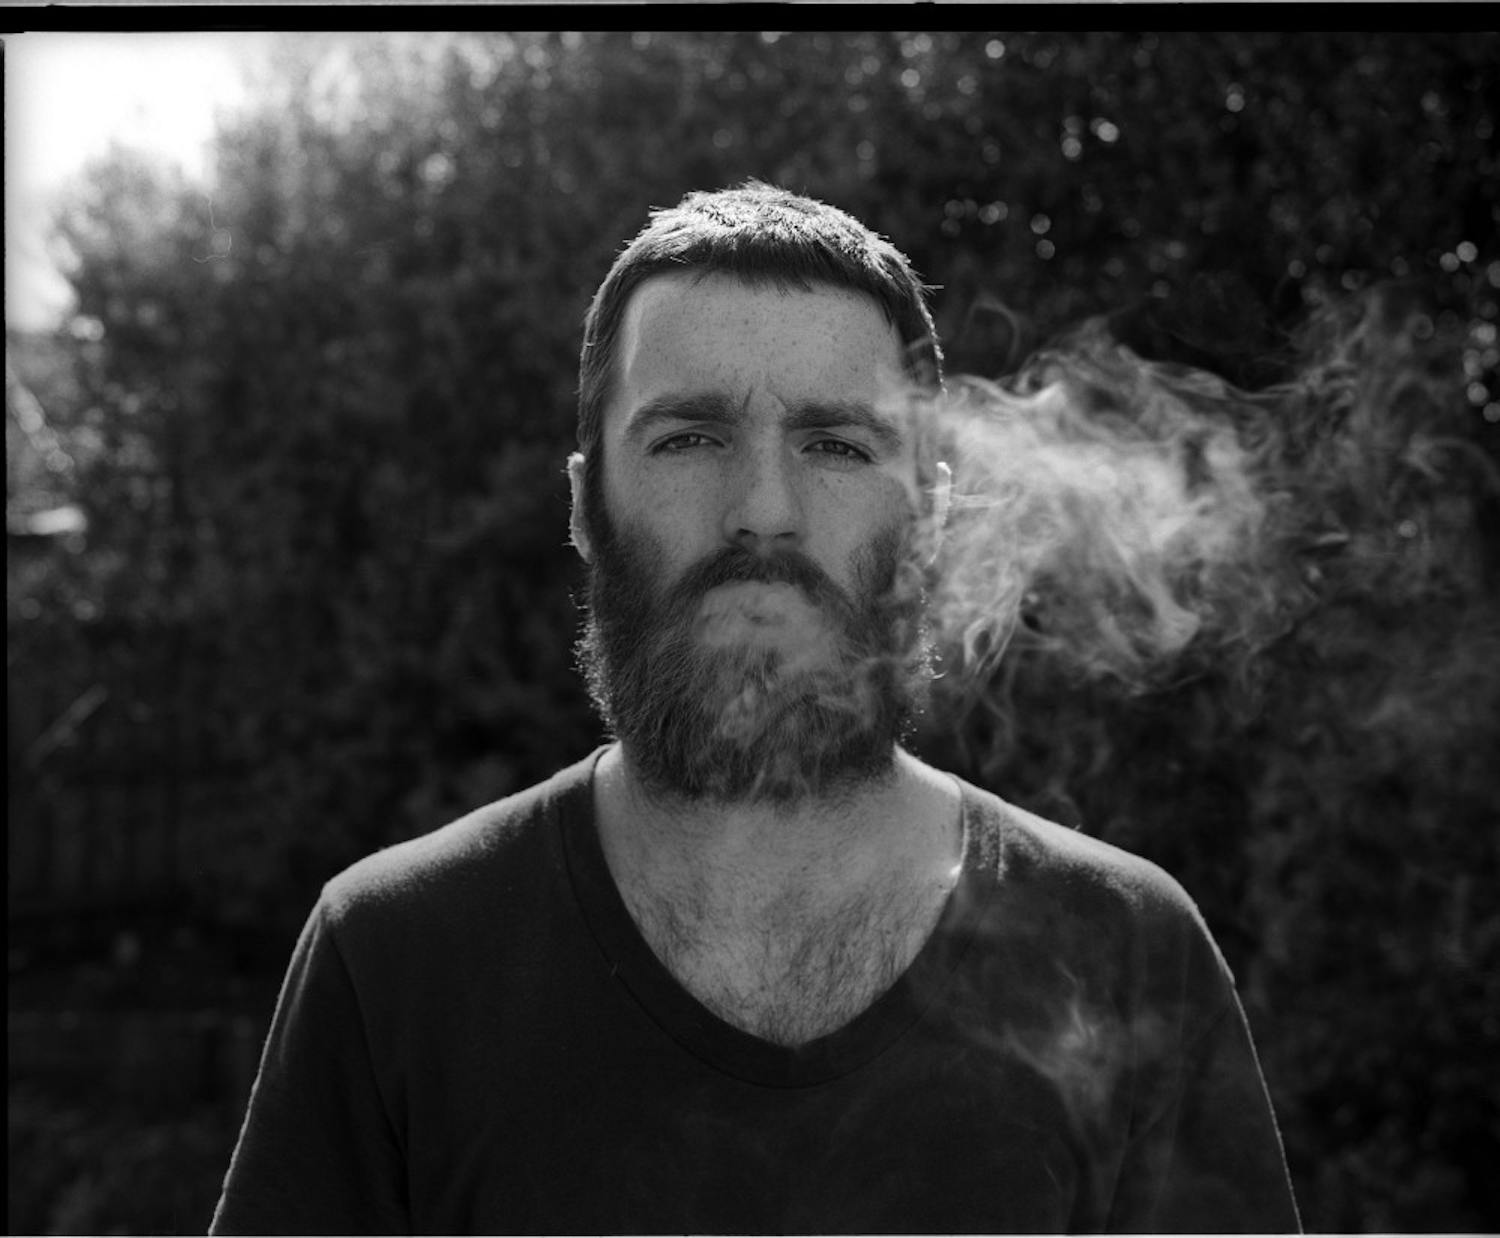 Chet Faker by: Interview Magazine